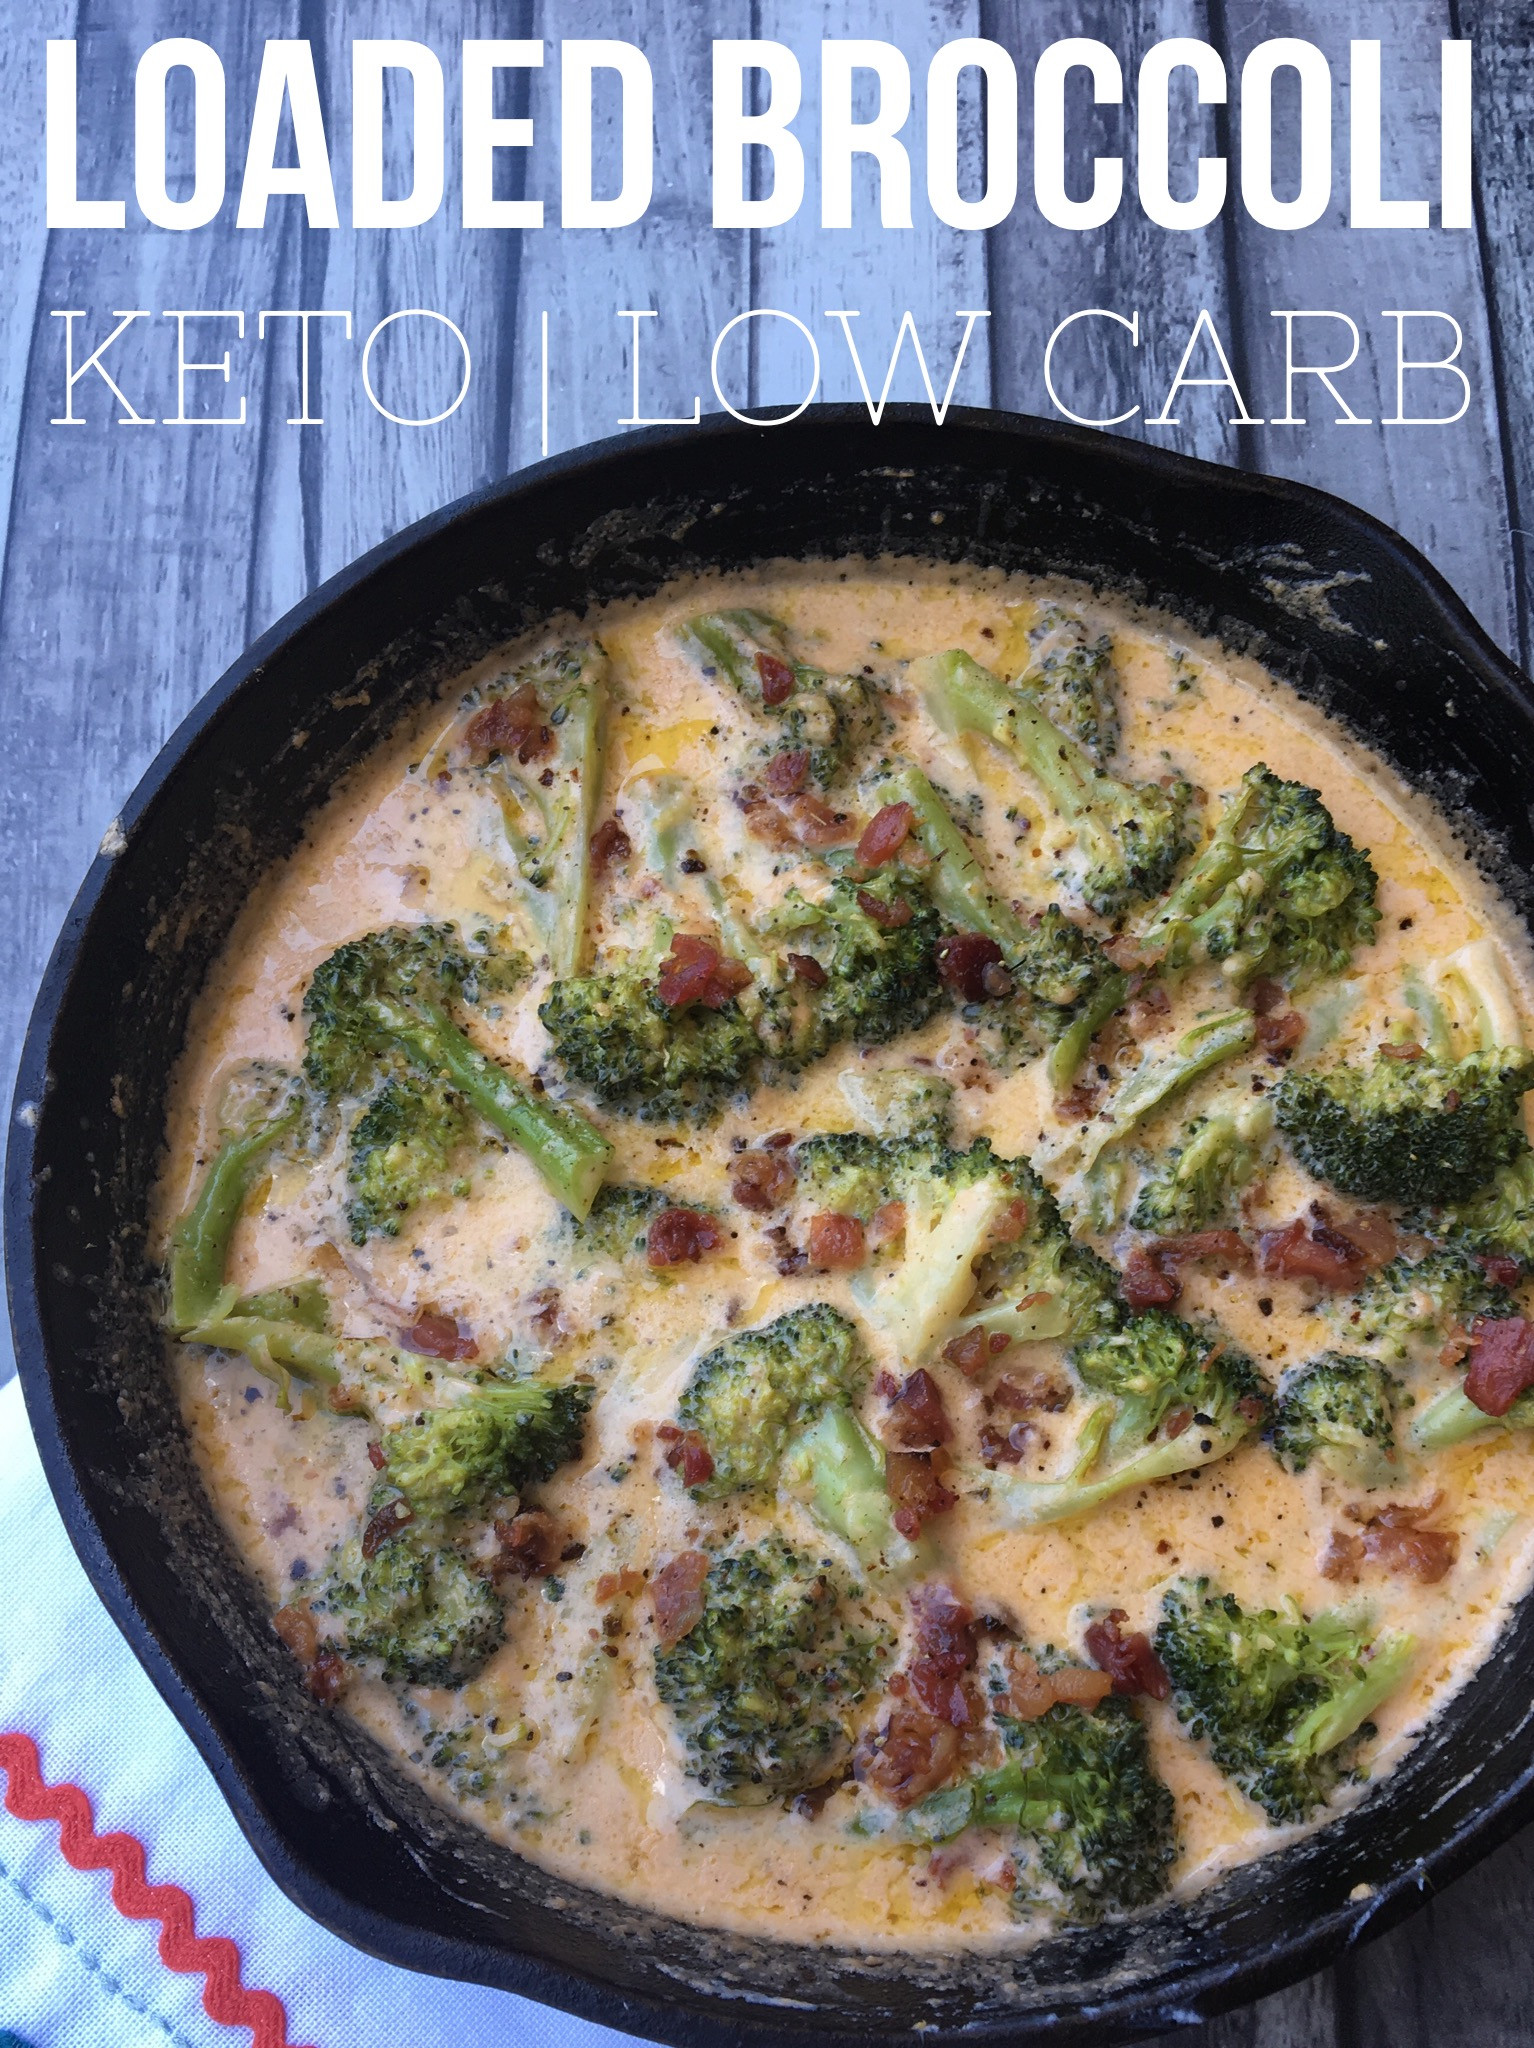 Broccoli Dinner Recipes
 The Very Best Keto Low carb Friendly Loaded Broccoli